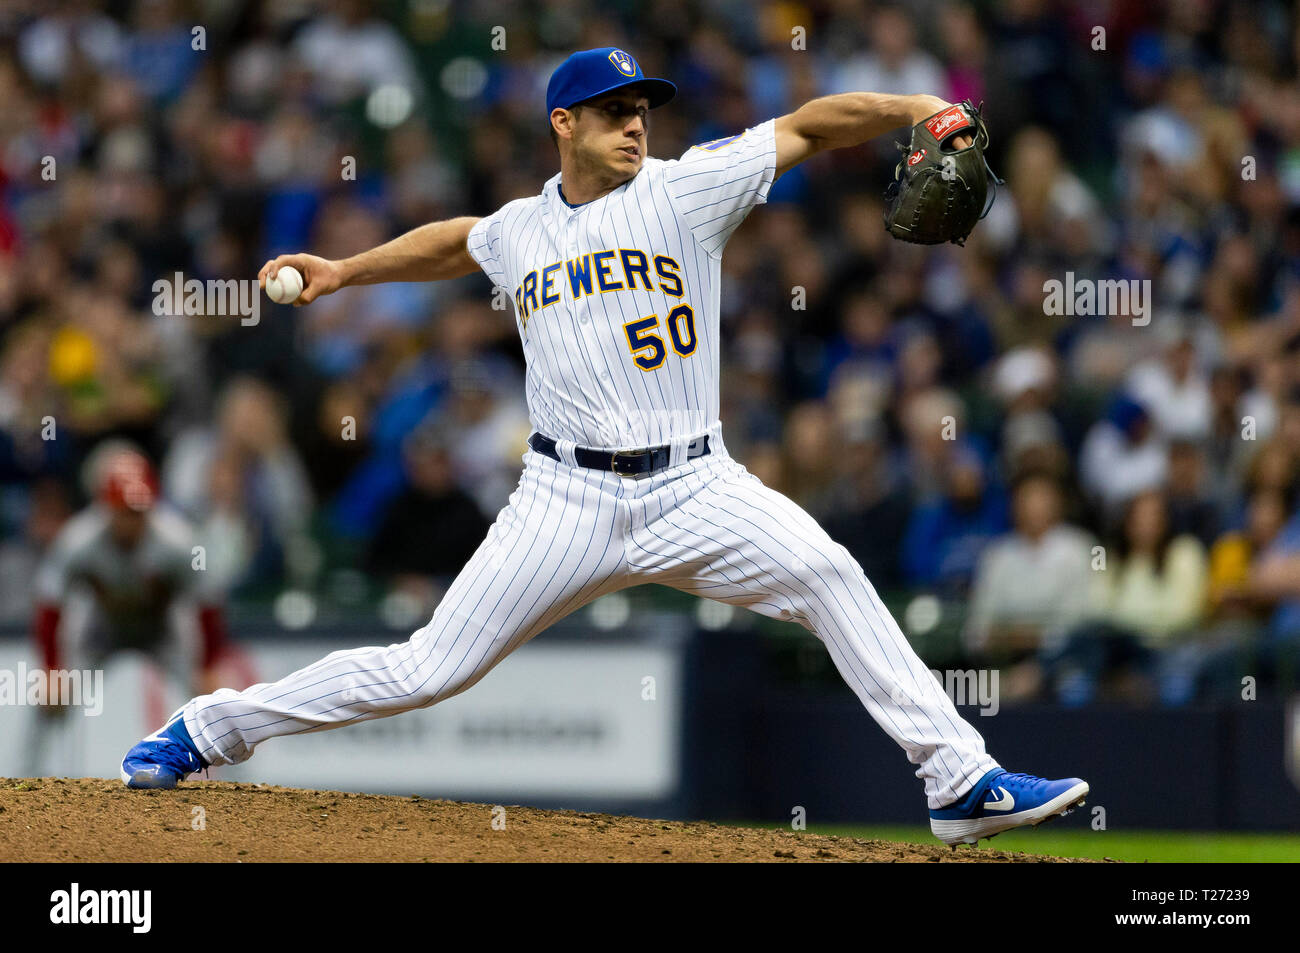 Milwaukee, WI, USA. 29th Mar, 2019. Milwaukee Brewers relief pitcher Jacob Barnes #50 delivers a pitch during the Major League Baseball game between the Milwaukee Brewers and the St. Louis Cardinals at Miller Park in Milwaukee, WI. John Fisher/CSM/Alamy Live News Stock Photo